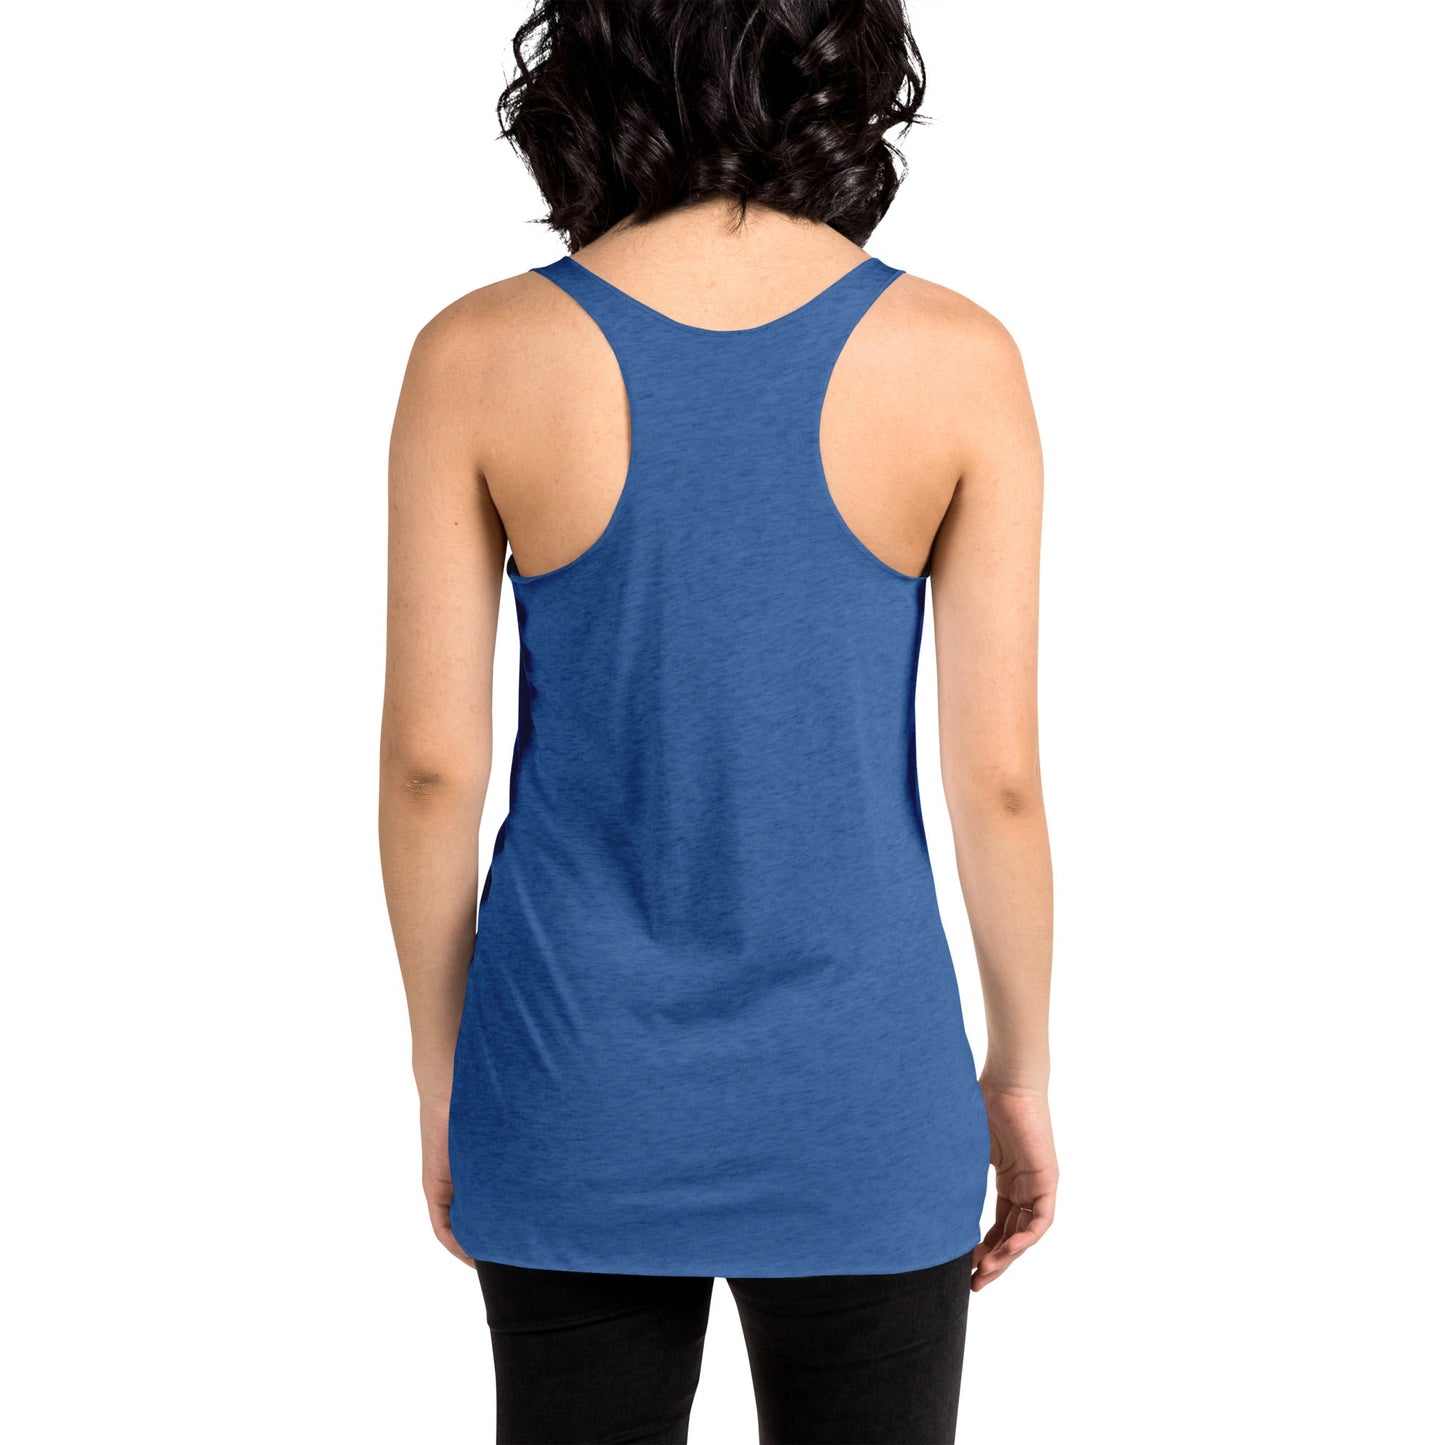 Dirty Mind - Racerback Graphic Tank Top